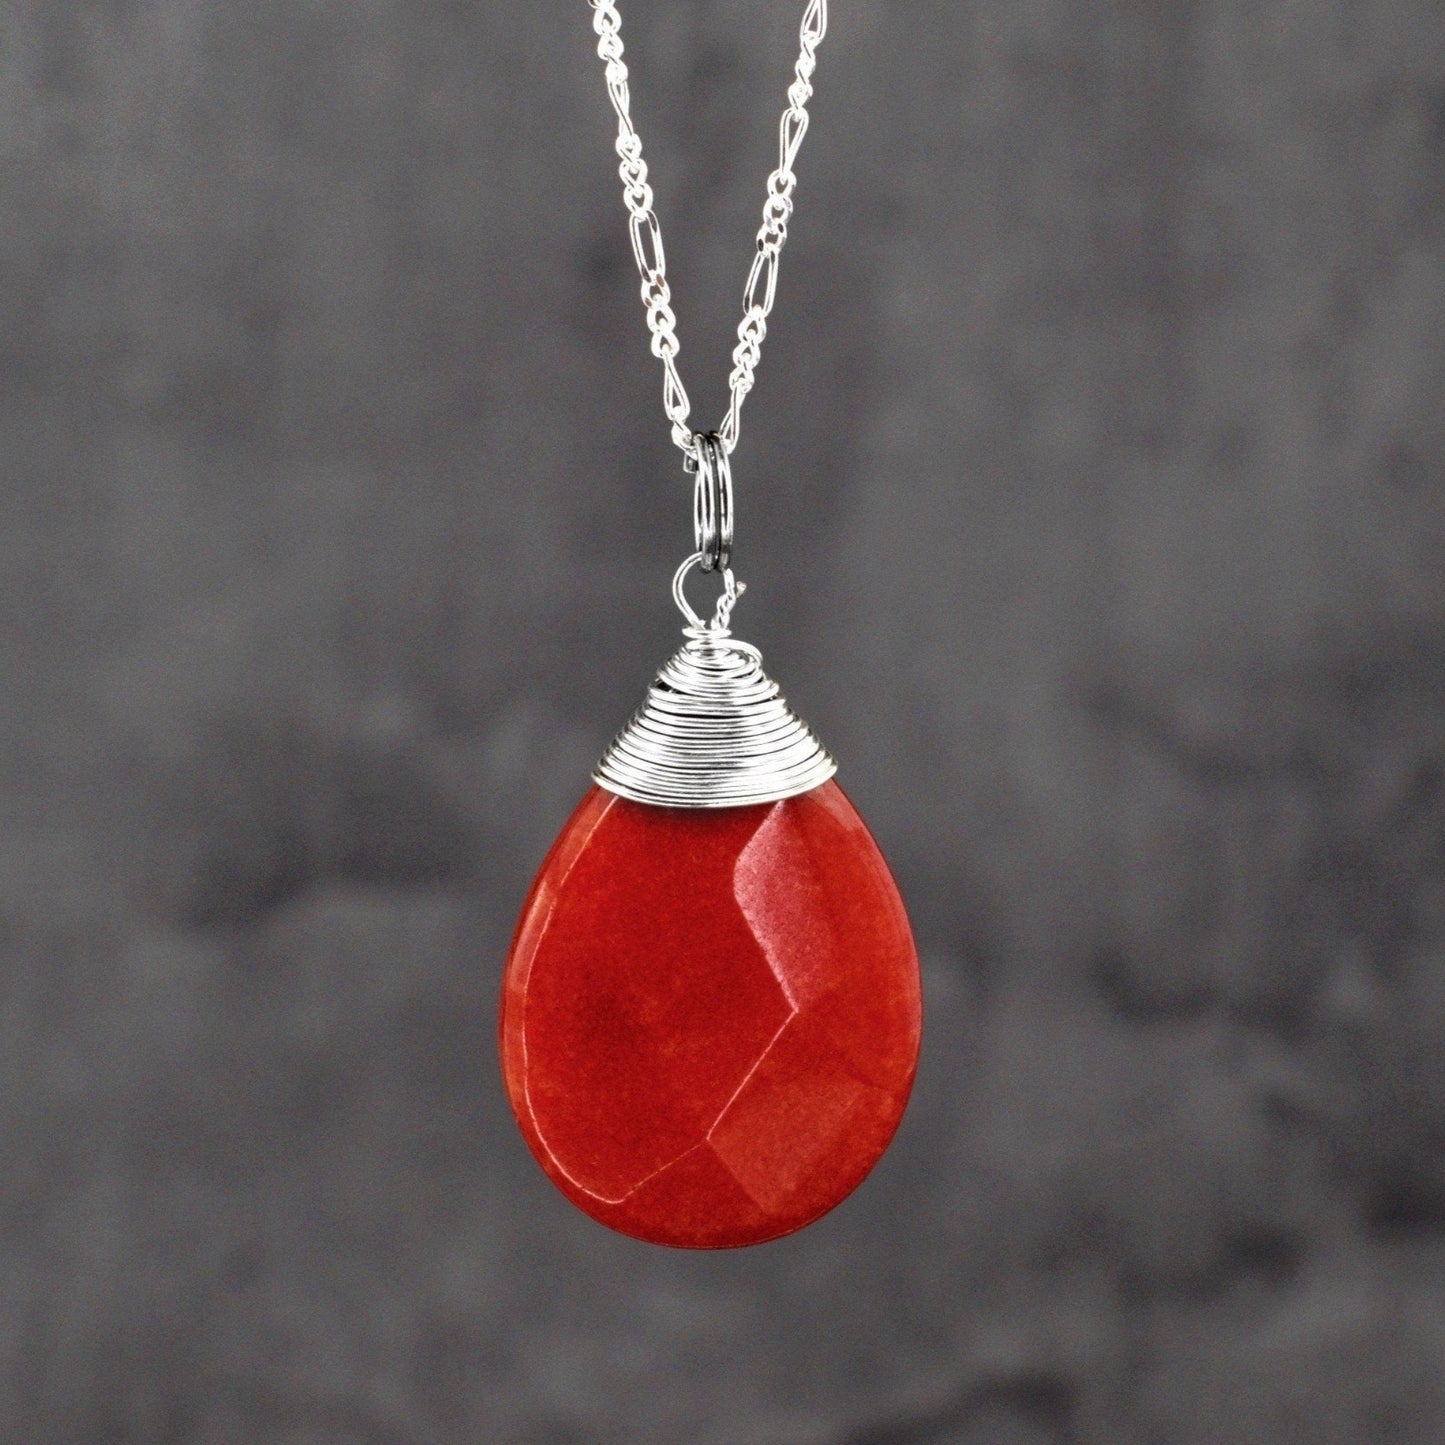 Jade Drop Silver Chain - 925 Sterling Granat Crystal Red Gem Necklace - K925-42